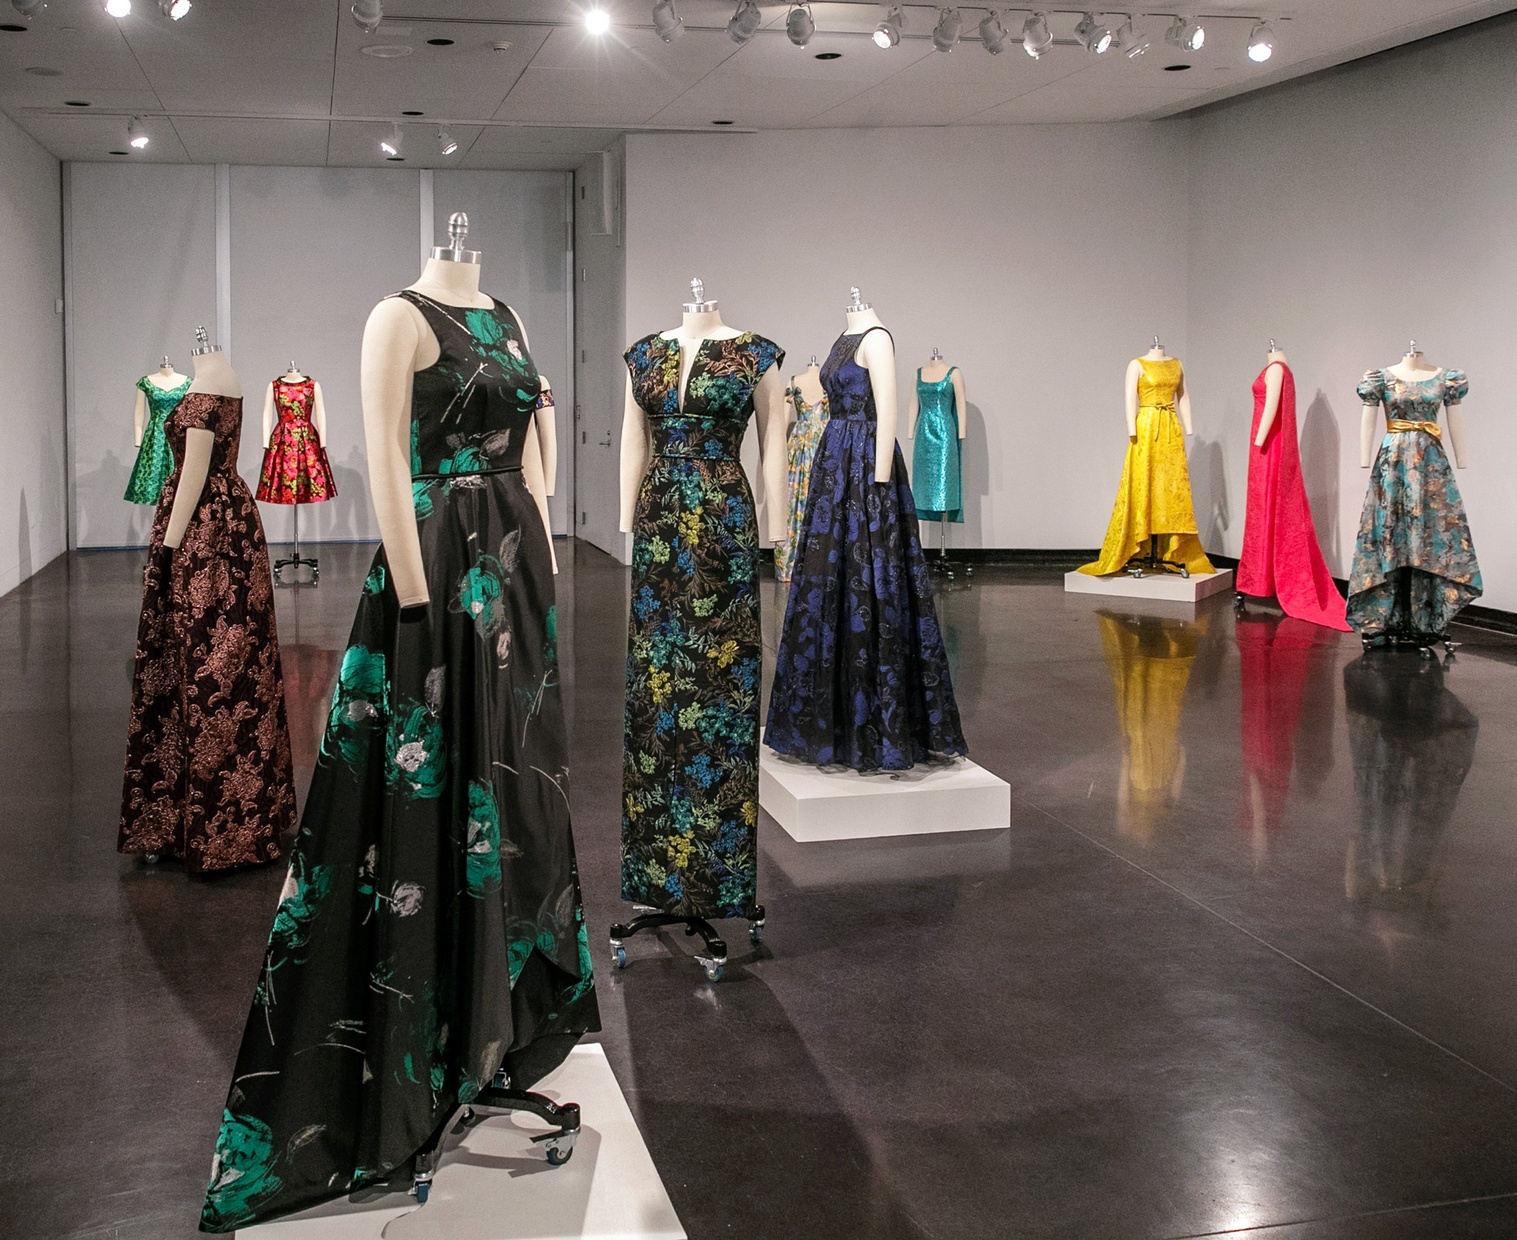 Multiple mannequins wearing colorful gowns placed throughout a room.